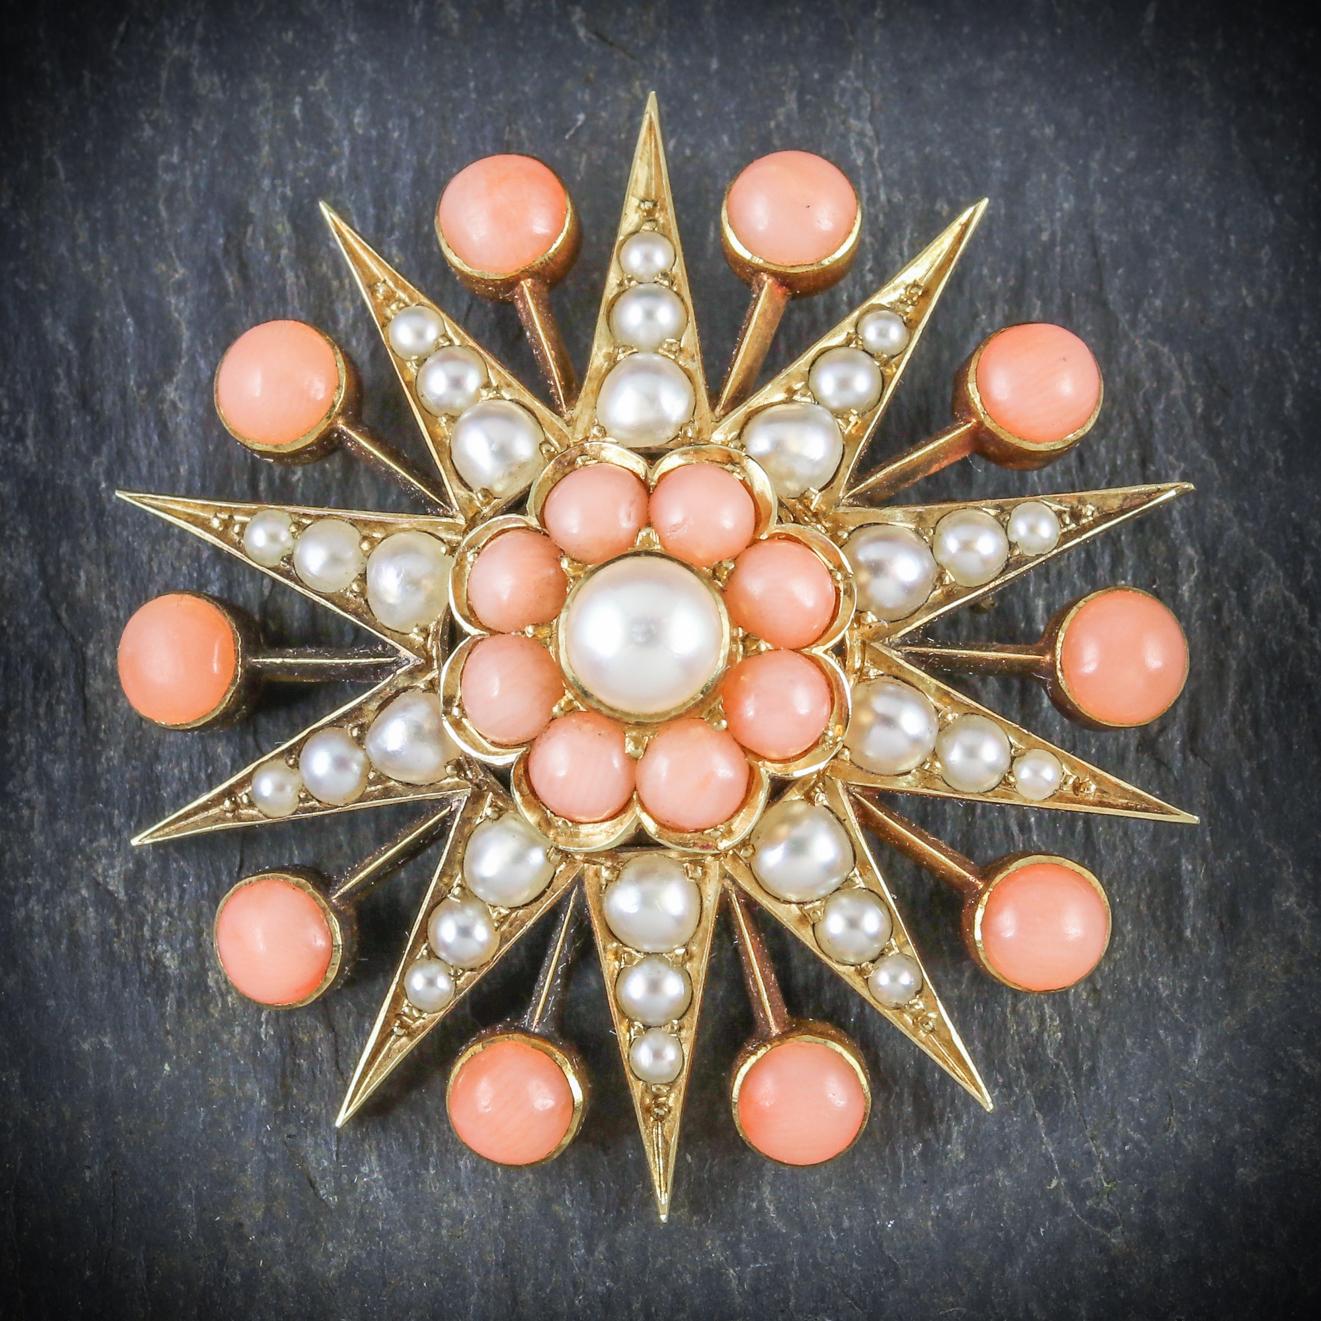 This fabulous antique Coral and Pearl star brooch is from the Victorian era, Circa 1900

The stunning piece is decorated in lovely Coral stones and creamy Pearls in a splendid 18ct Yellow Gold star gallery

The Coral stones add up to 4.1cts in total